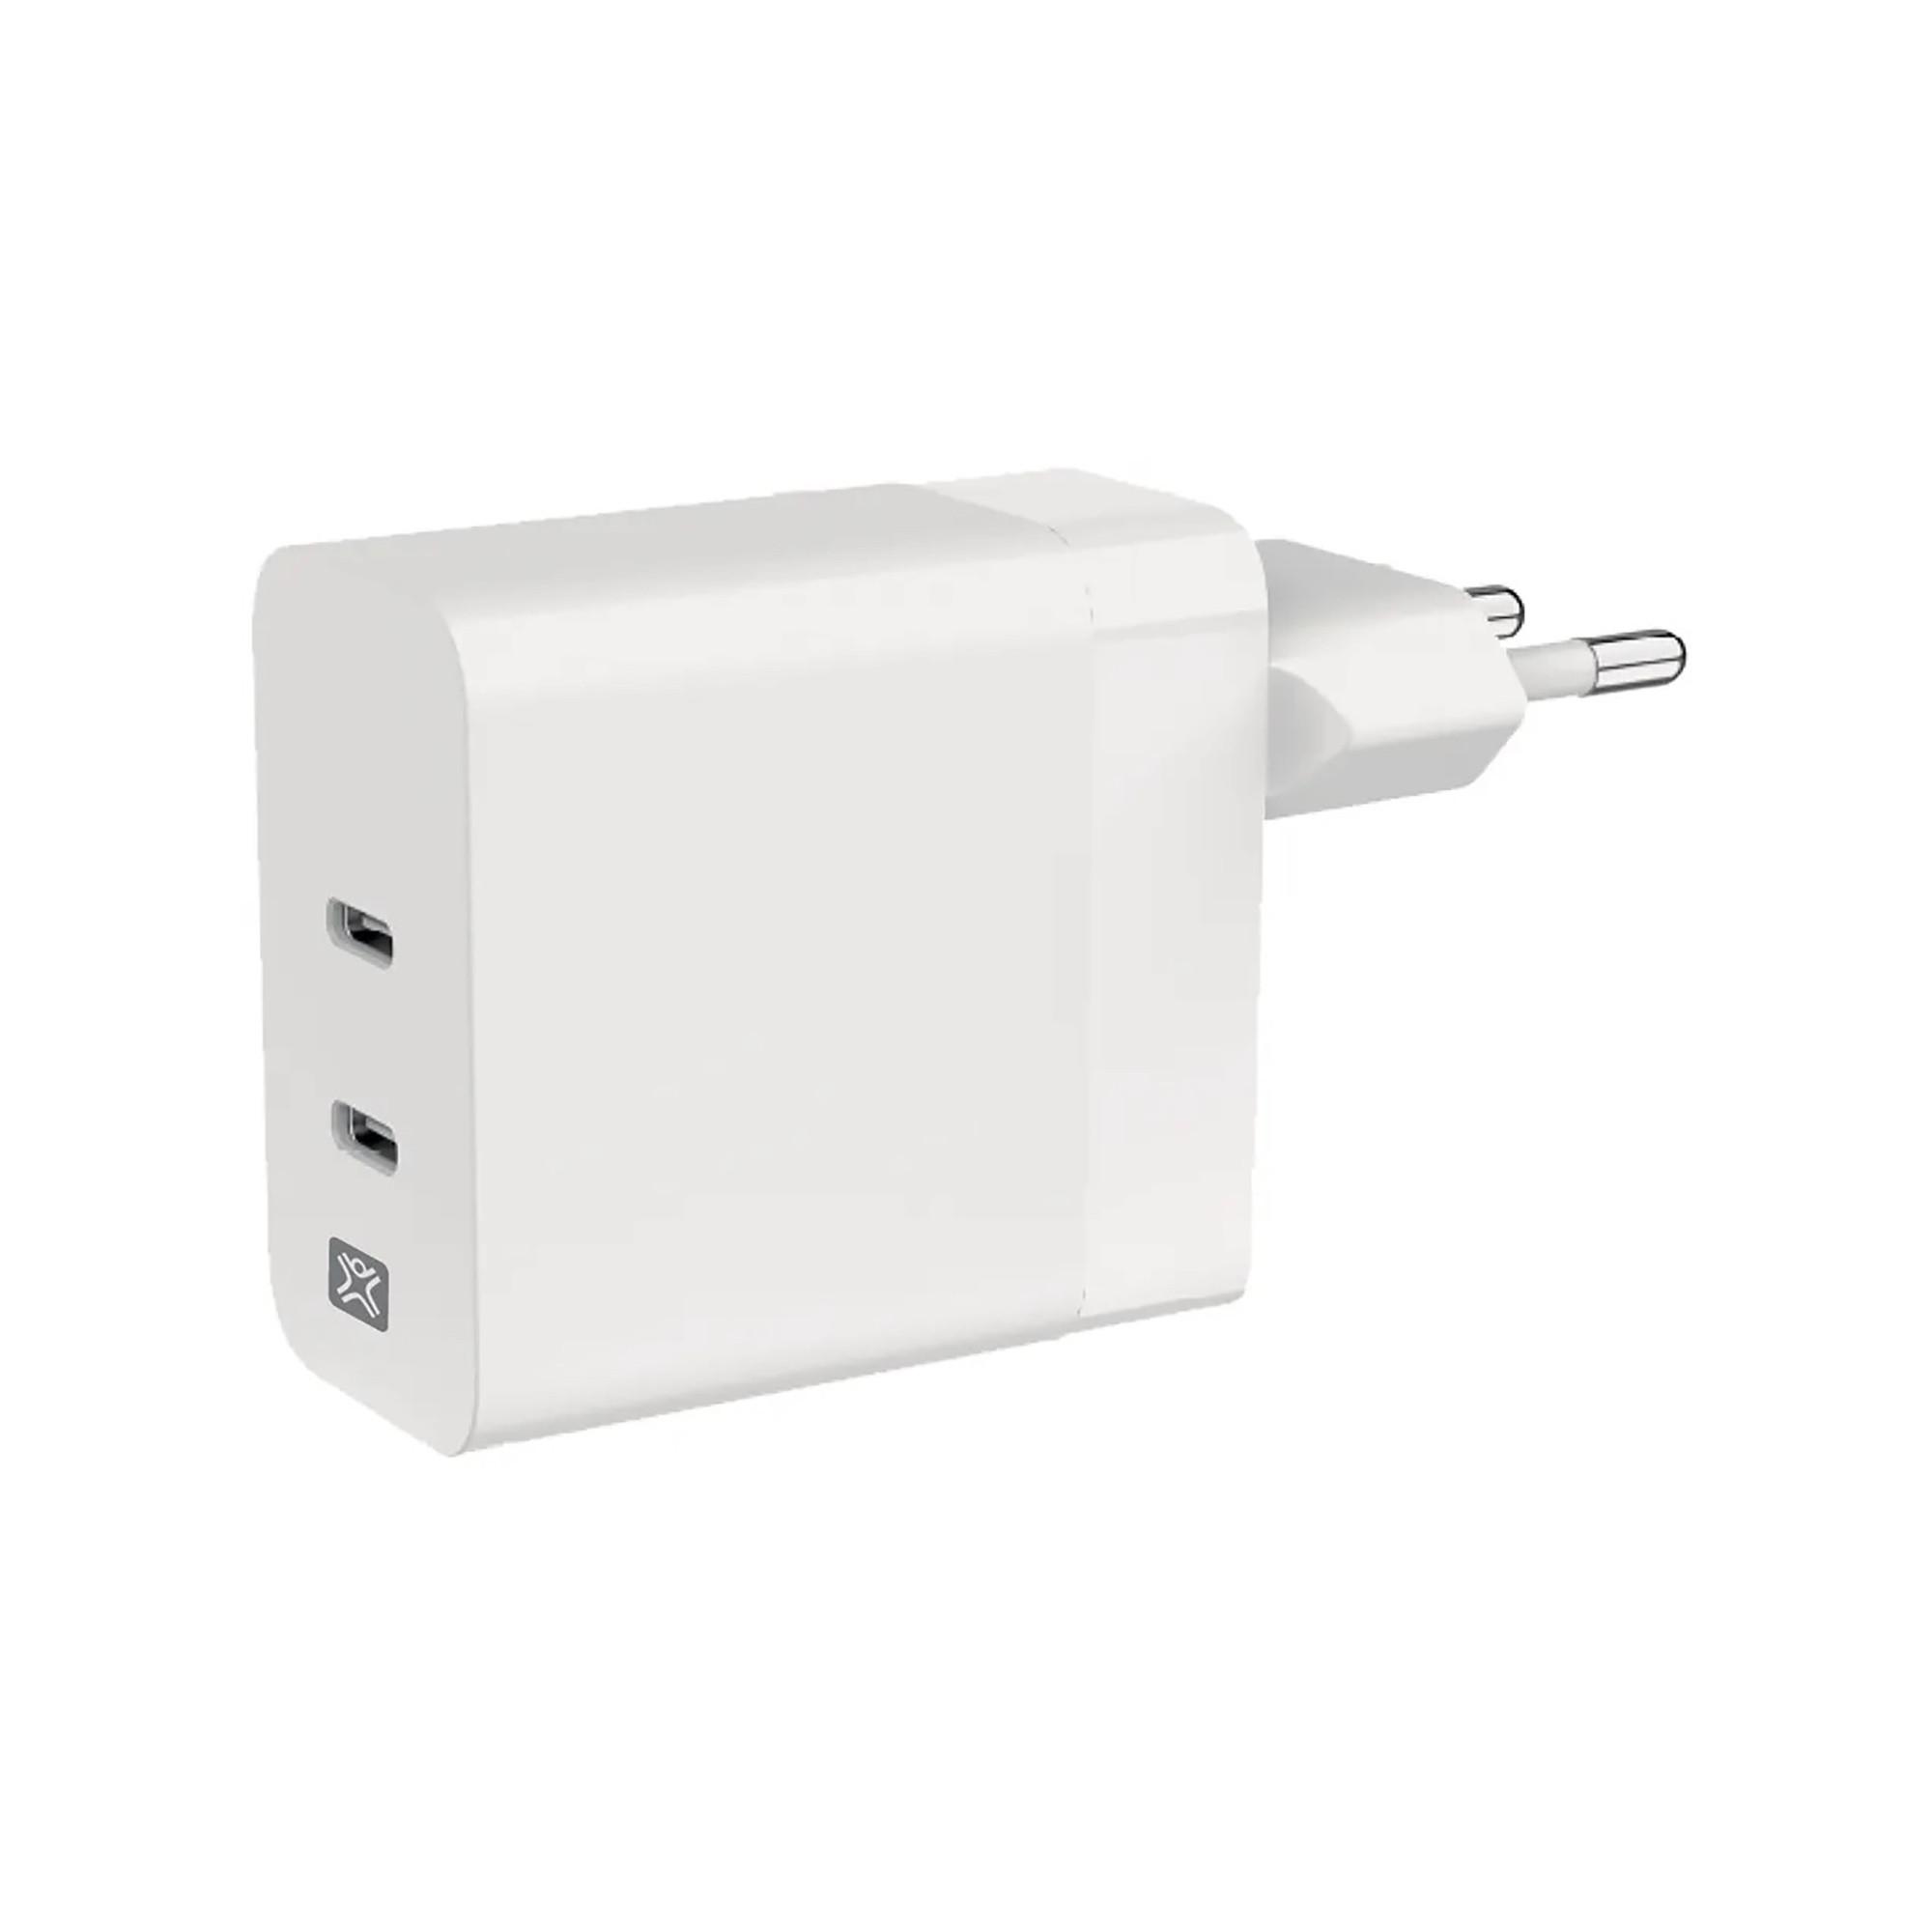 XtremeMac Wall Charger Double USB-C 65W Chargeur USB
 